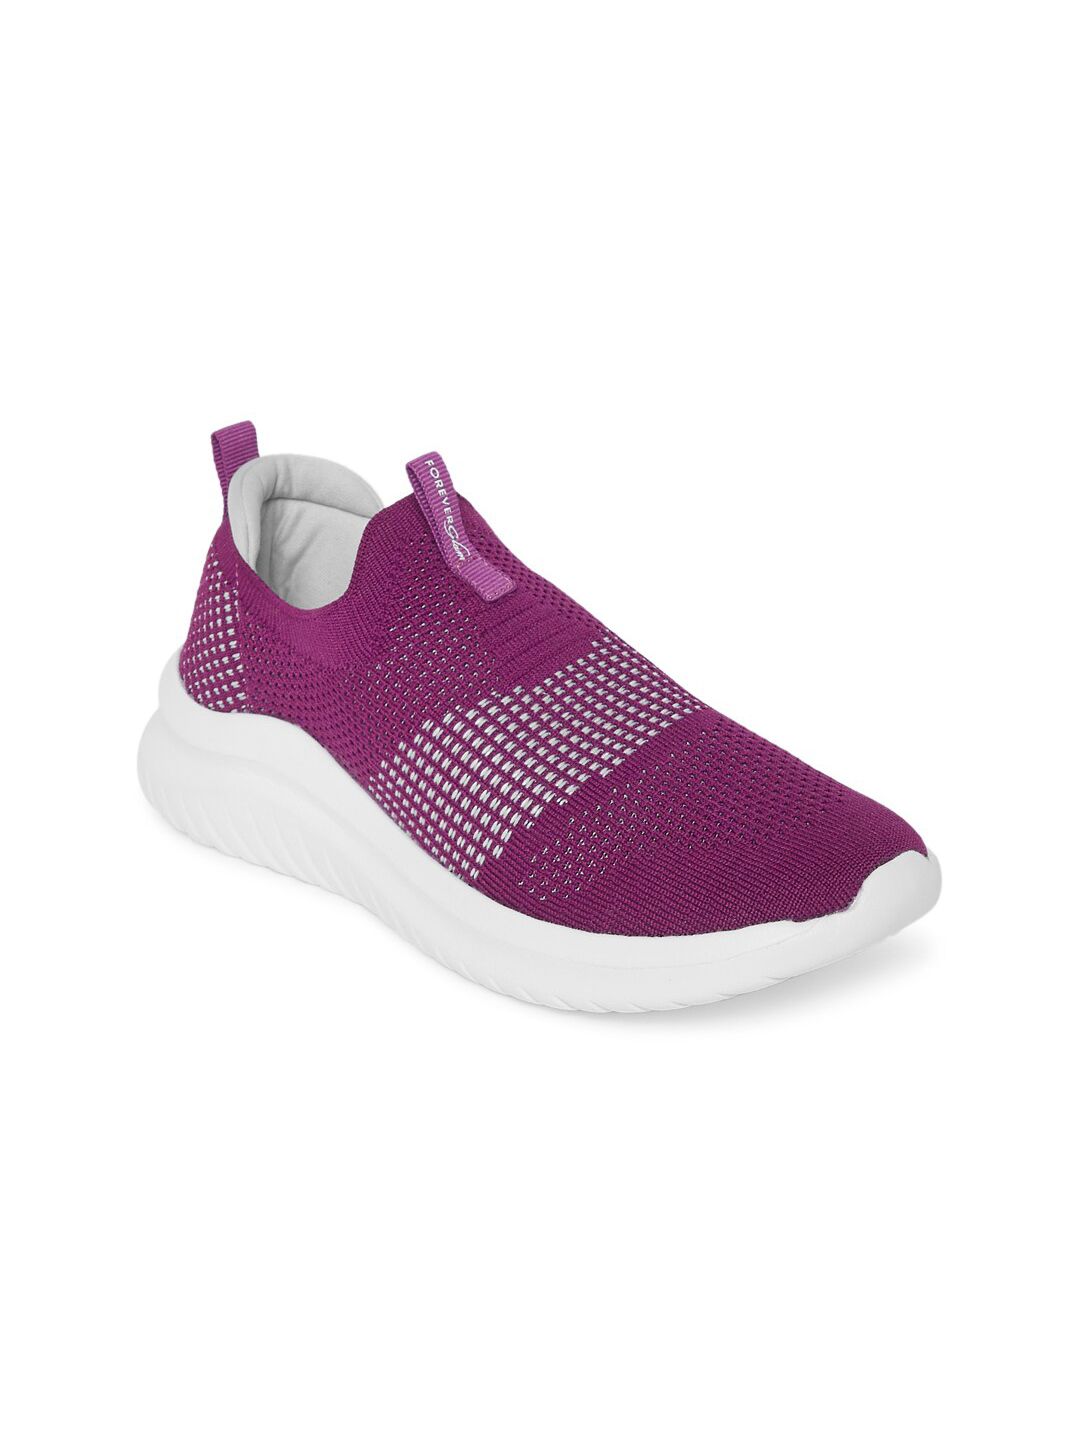 Forever Glam by Pantaloons Women Purple Textile Walking Non-Marking Shoes Price in India